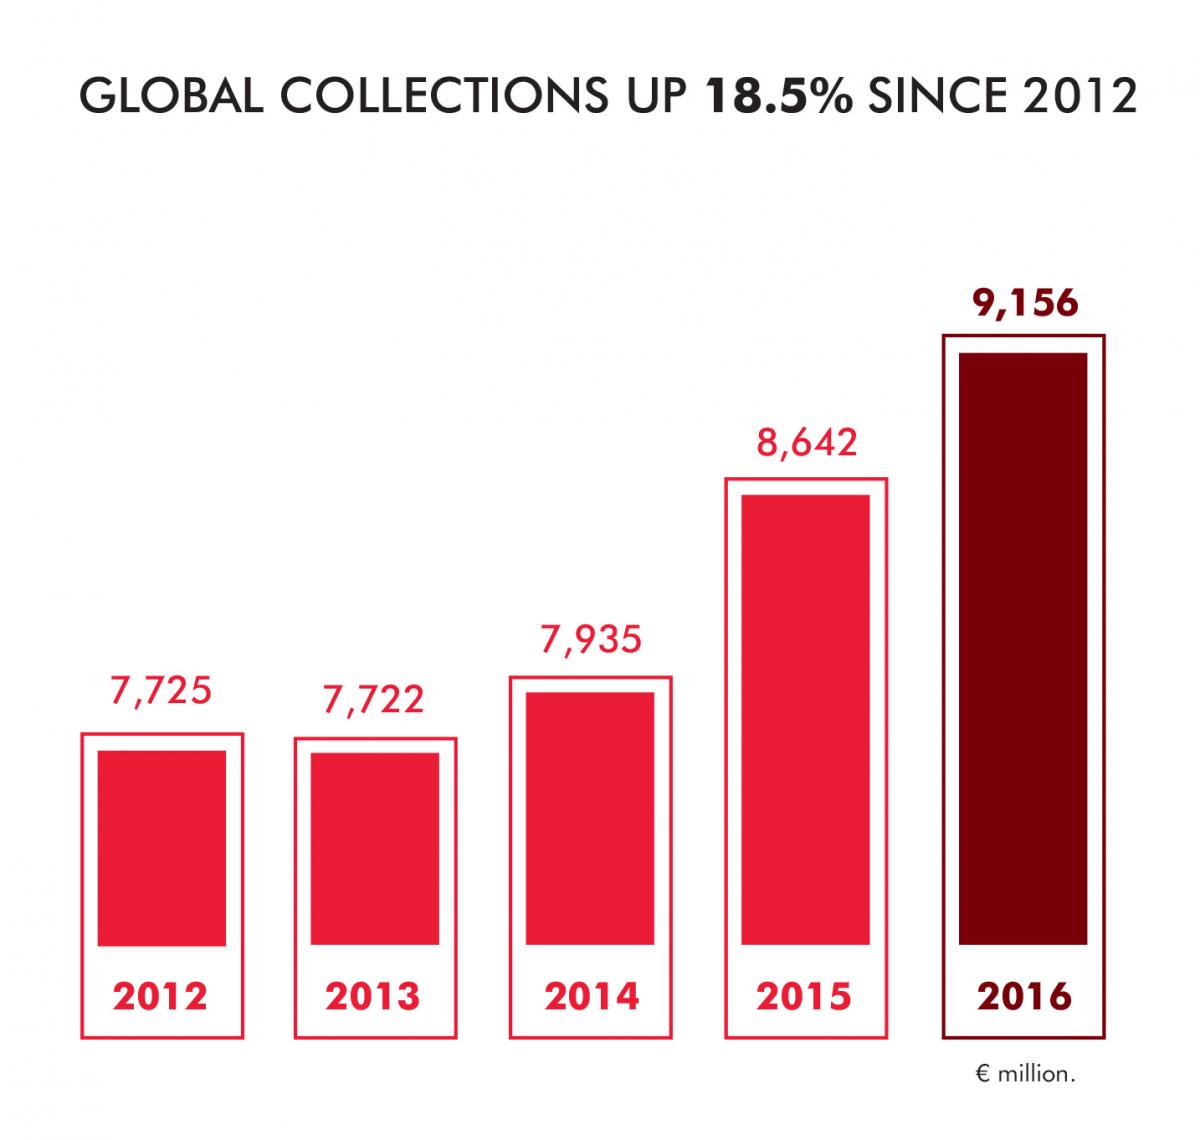 CISAC GCR17-Global collections up 18.5% since 2012